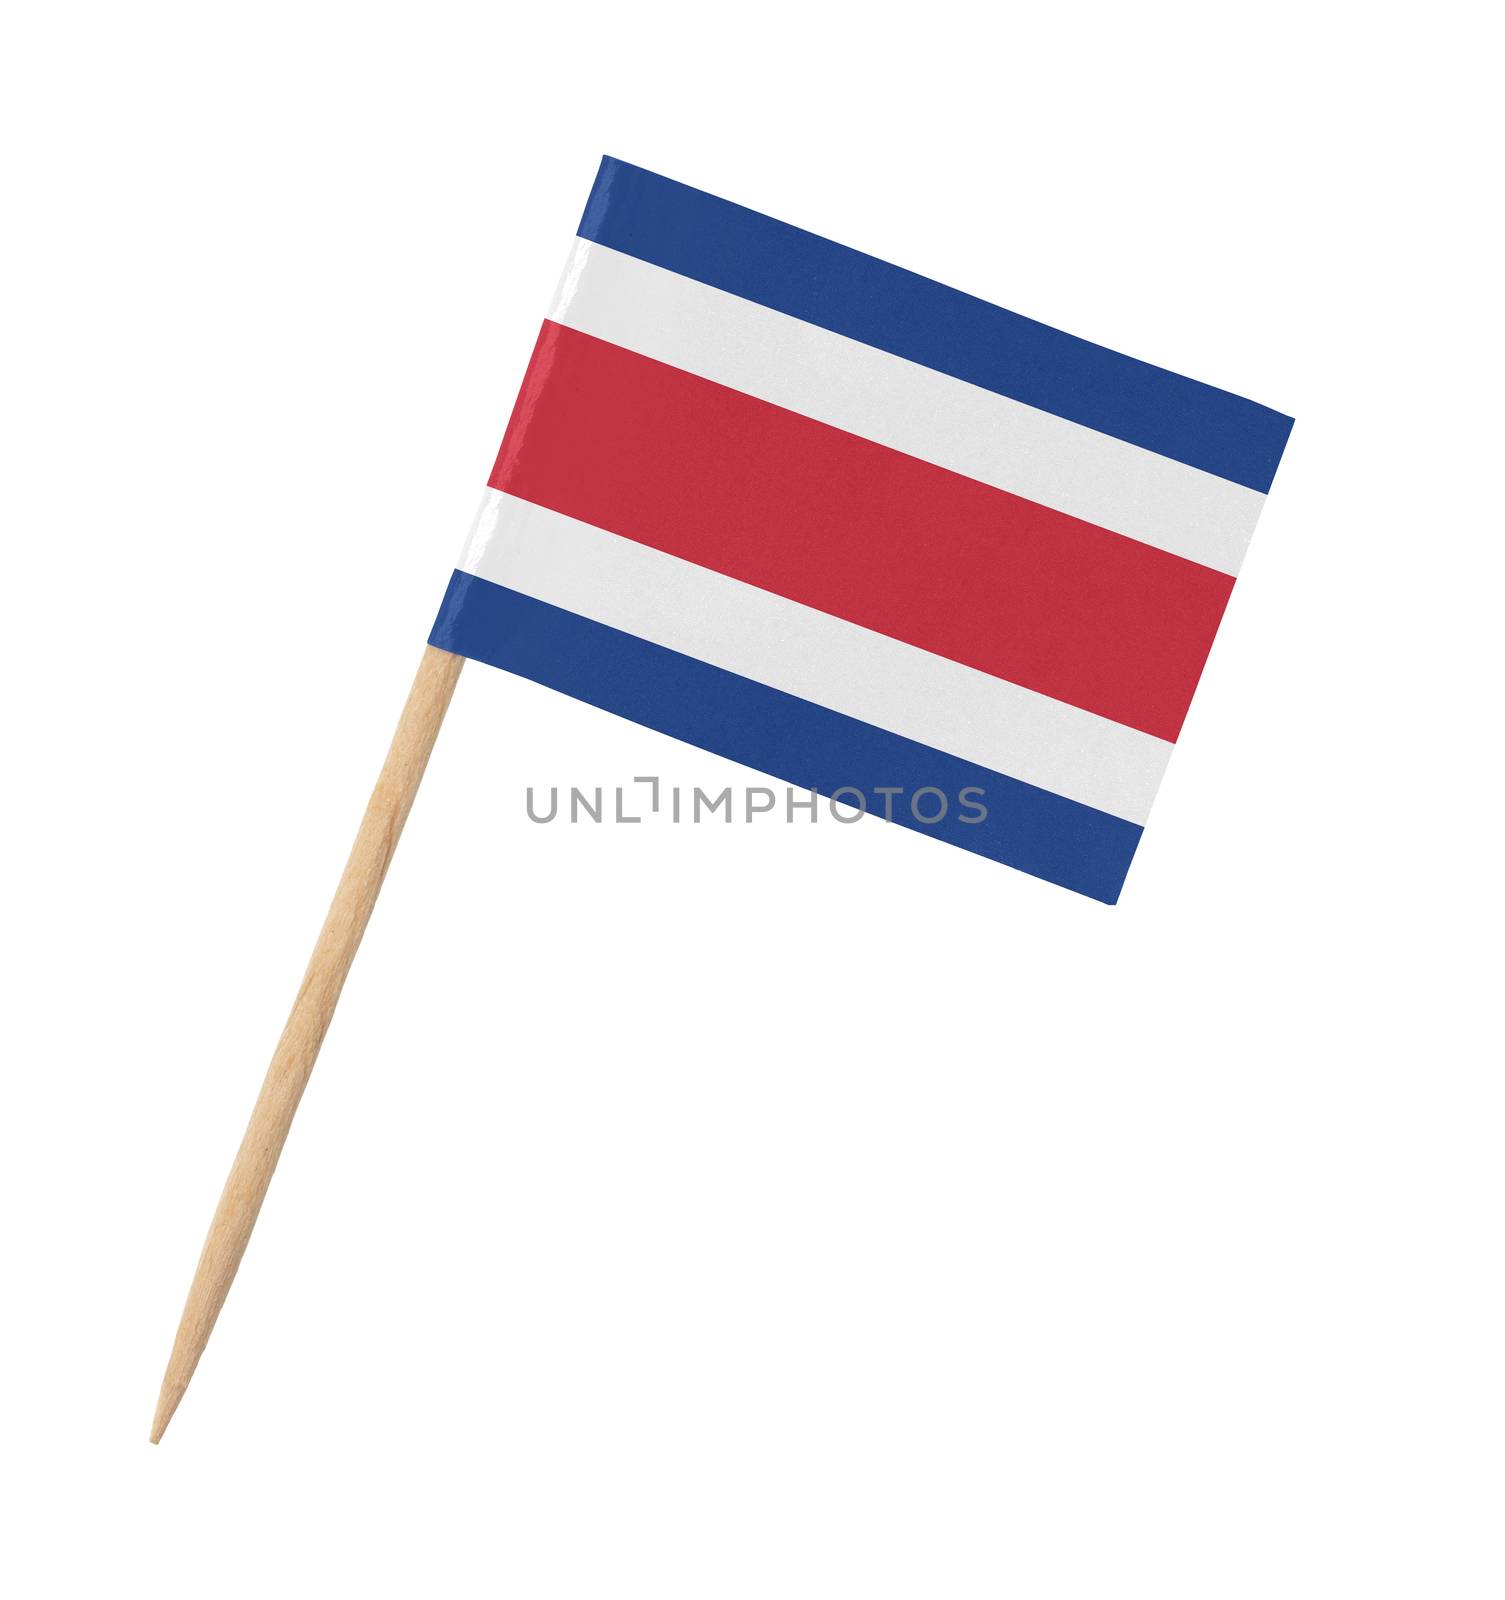 Small paper Costa Rican flag on wooden stick, isolated on white